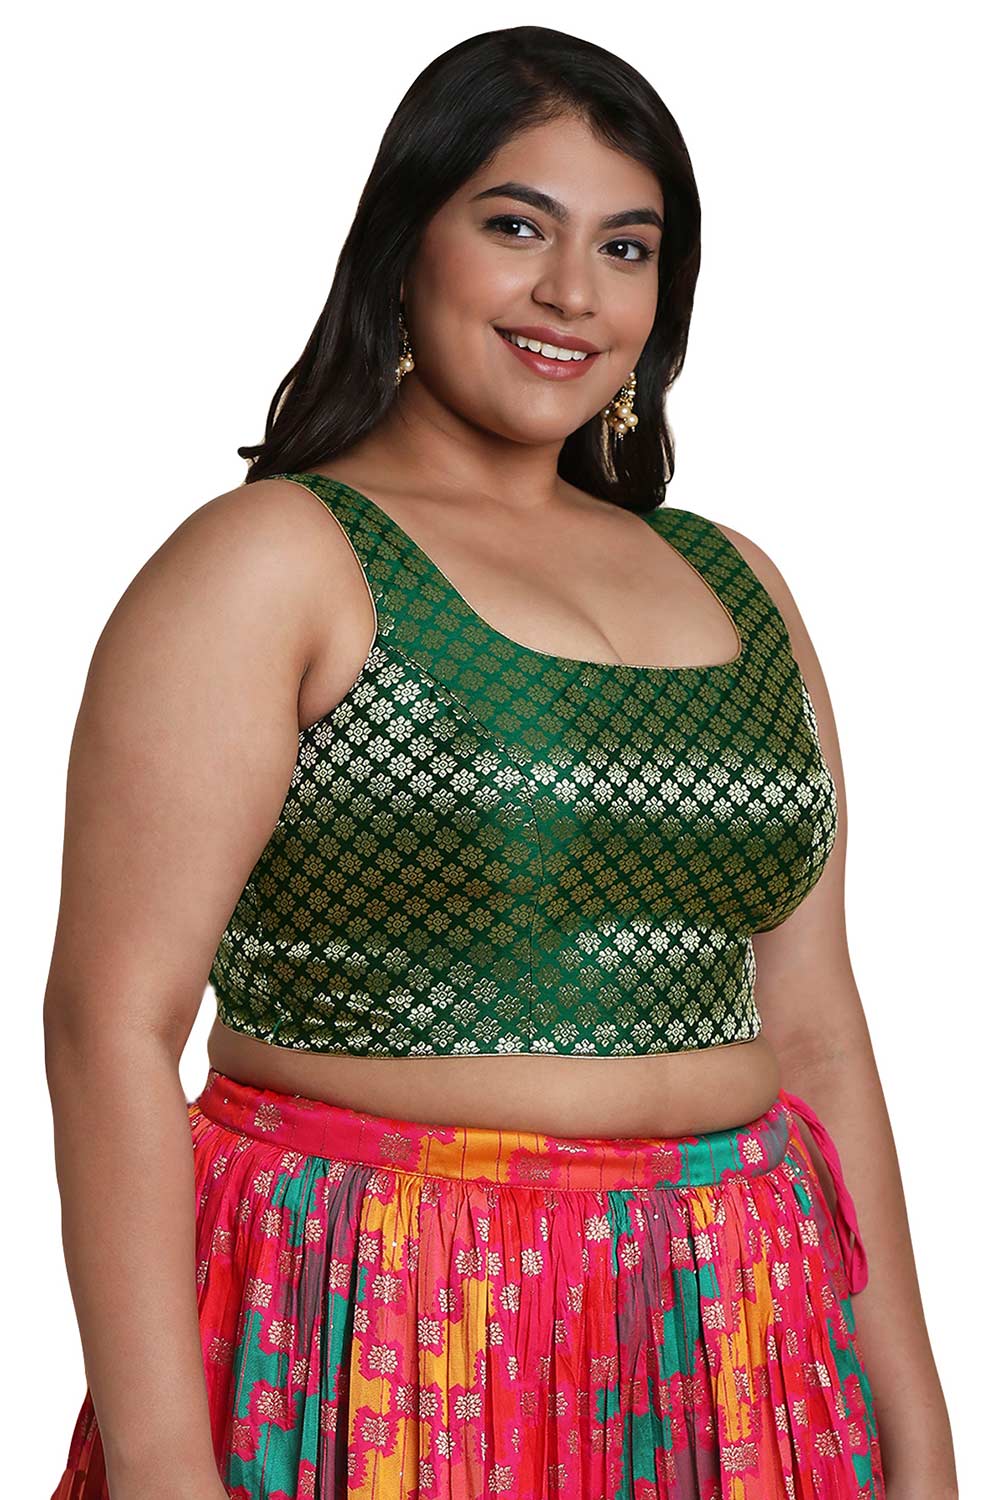 Buy Green Brocade Readymade Saree Blouse Online - One Minute Sareee